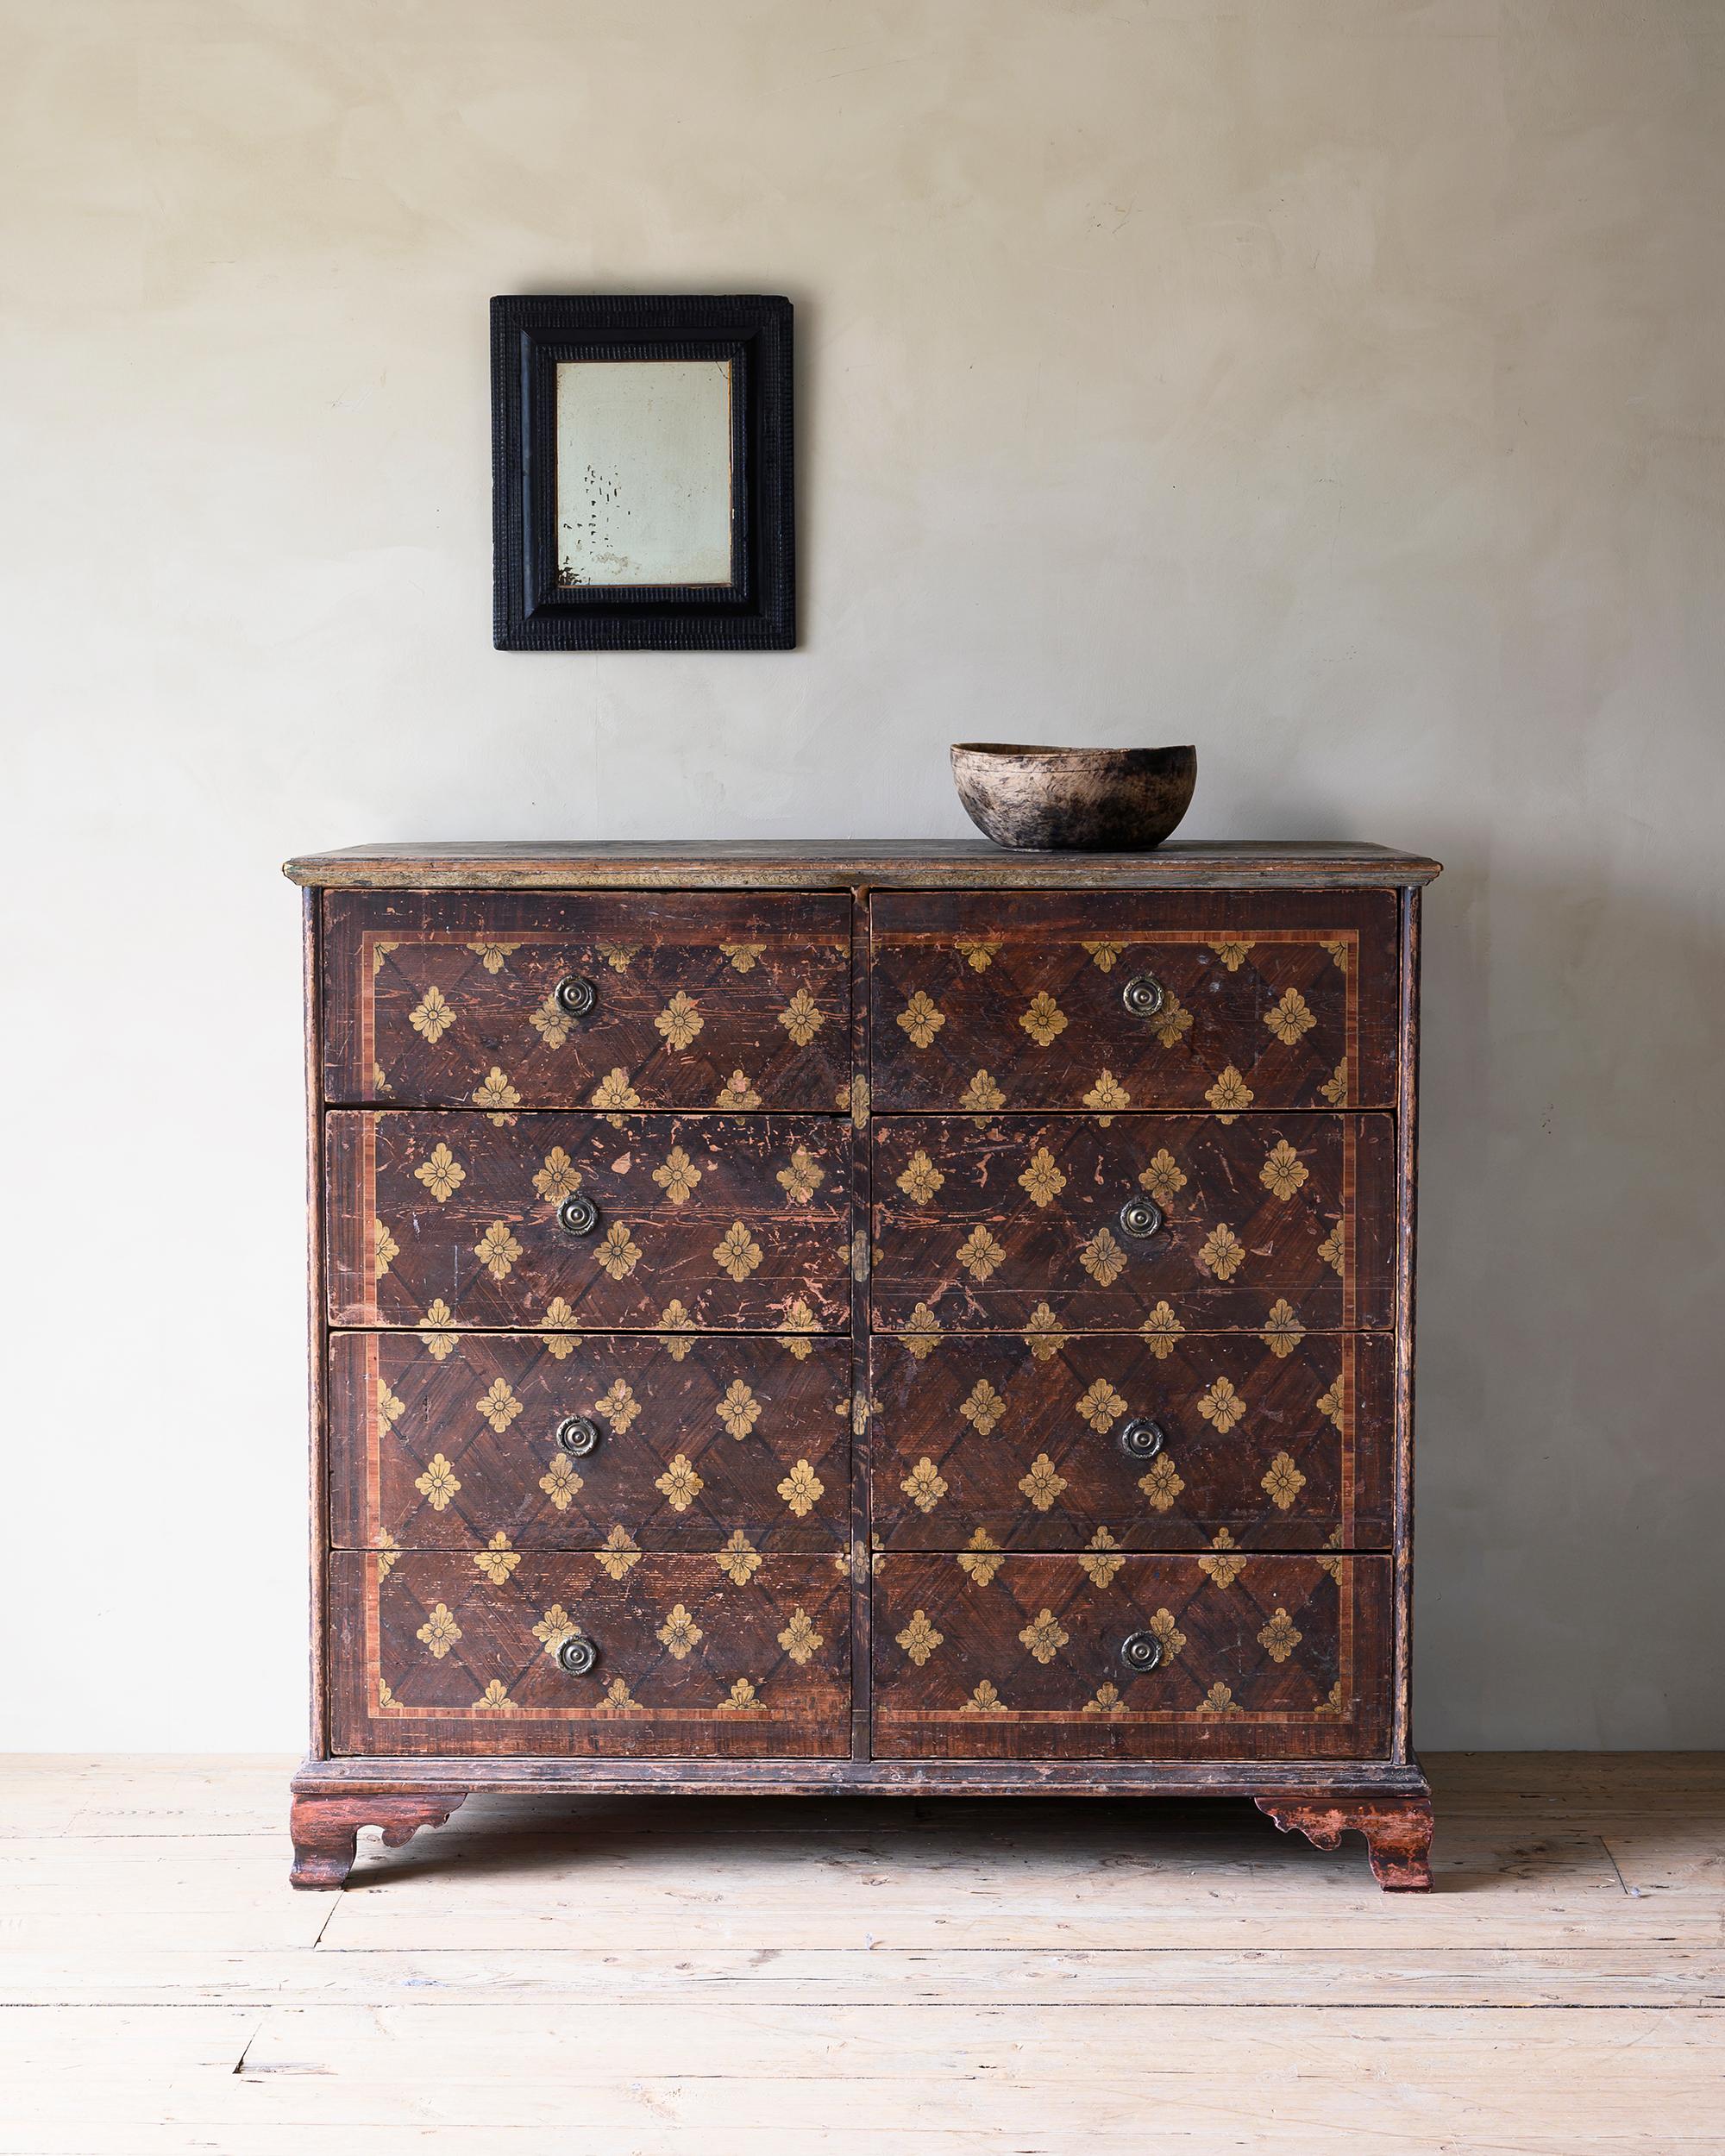 Remarkable and unusual Swedish provincial manor house chest of drawers / commode from the Gustavian period. Exceptional original painted decor. ca 1800 Sweden / Scandinavia. Nicknamed The Louie Vuitton Commode ;)